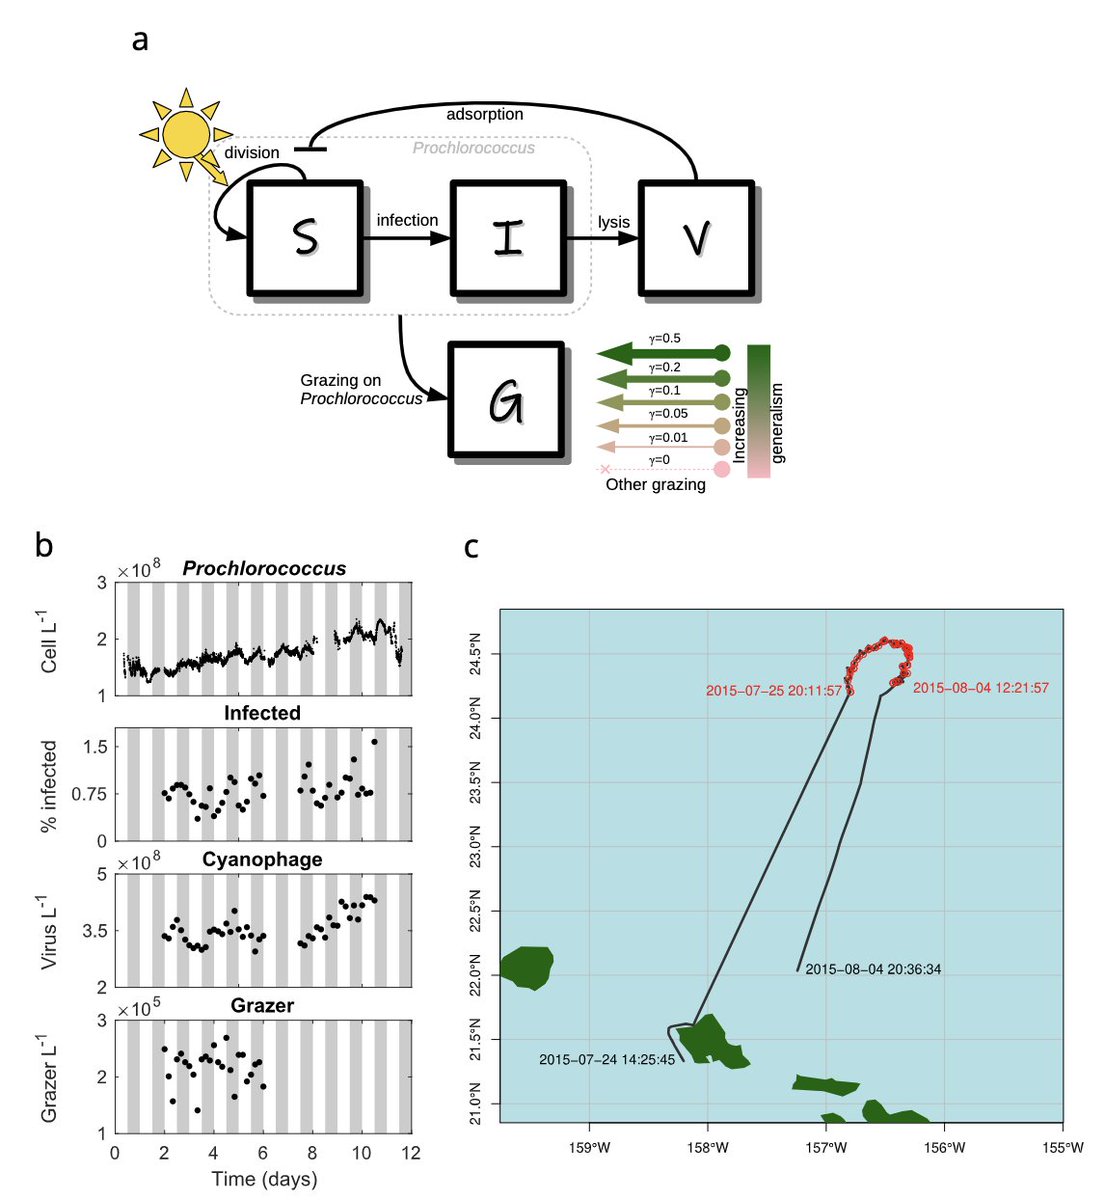 Paper now out in @NatureComms arising from a long-term collaboration, led by @BeckettStephen and @D2mory on 'Disentangling top-down drivers of mortality underlying diel population dynamics of Prochlorococcus in the North PacificSubtropical Gyre'. nature.com/articles/s4146…